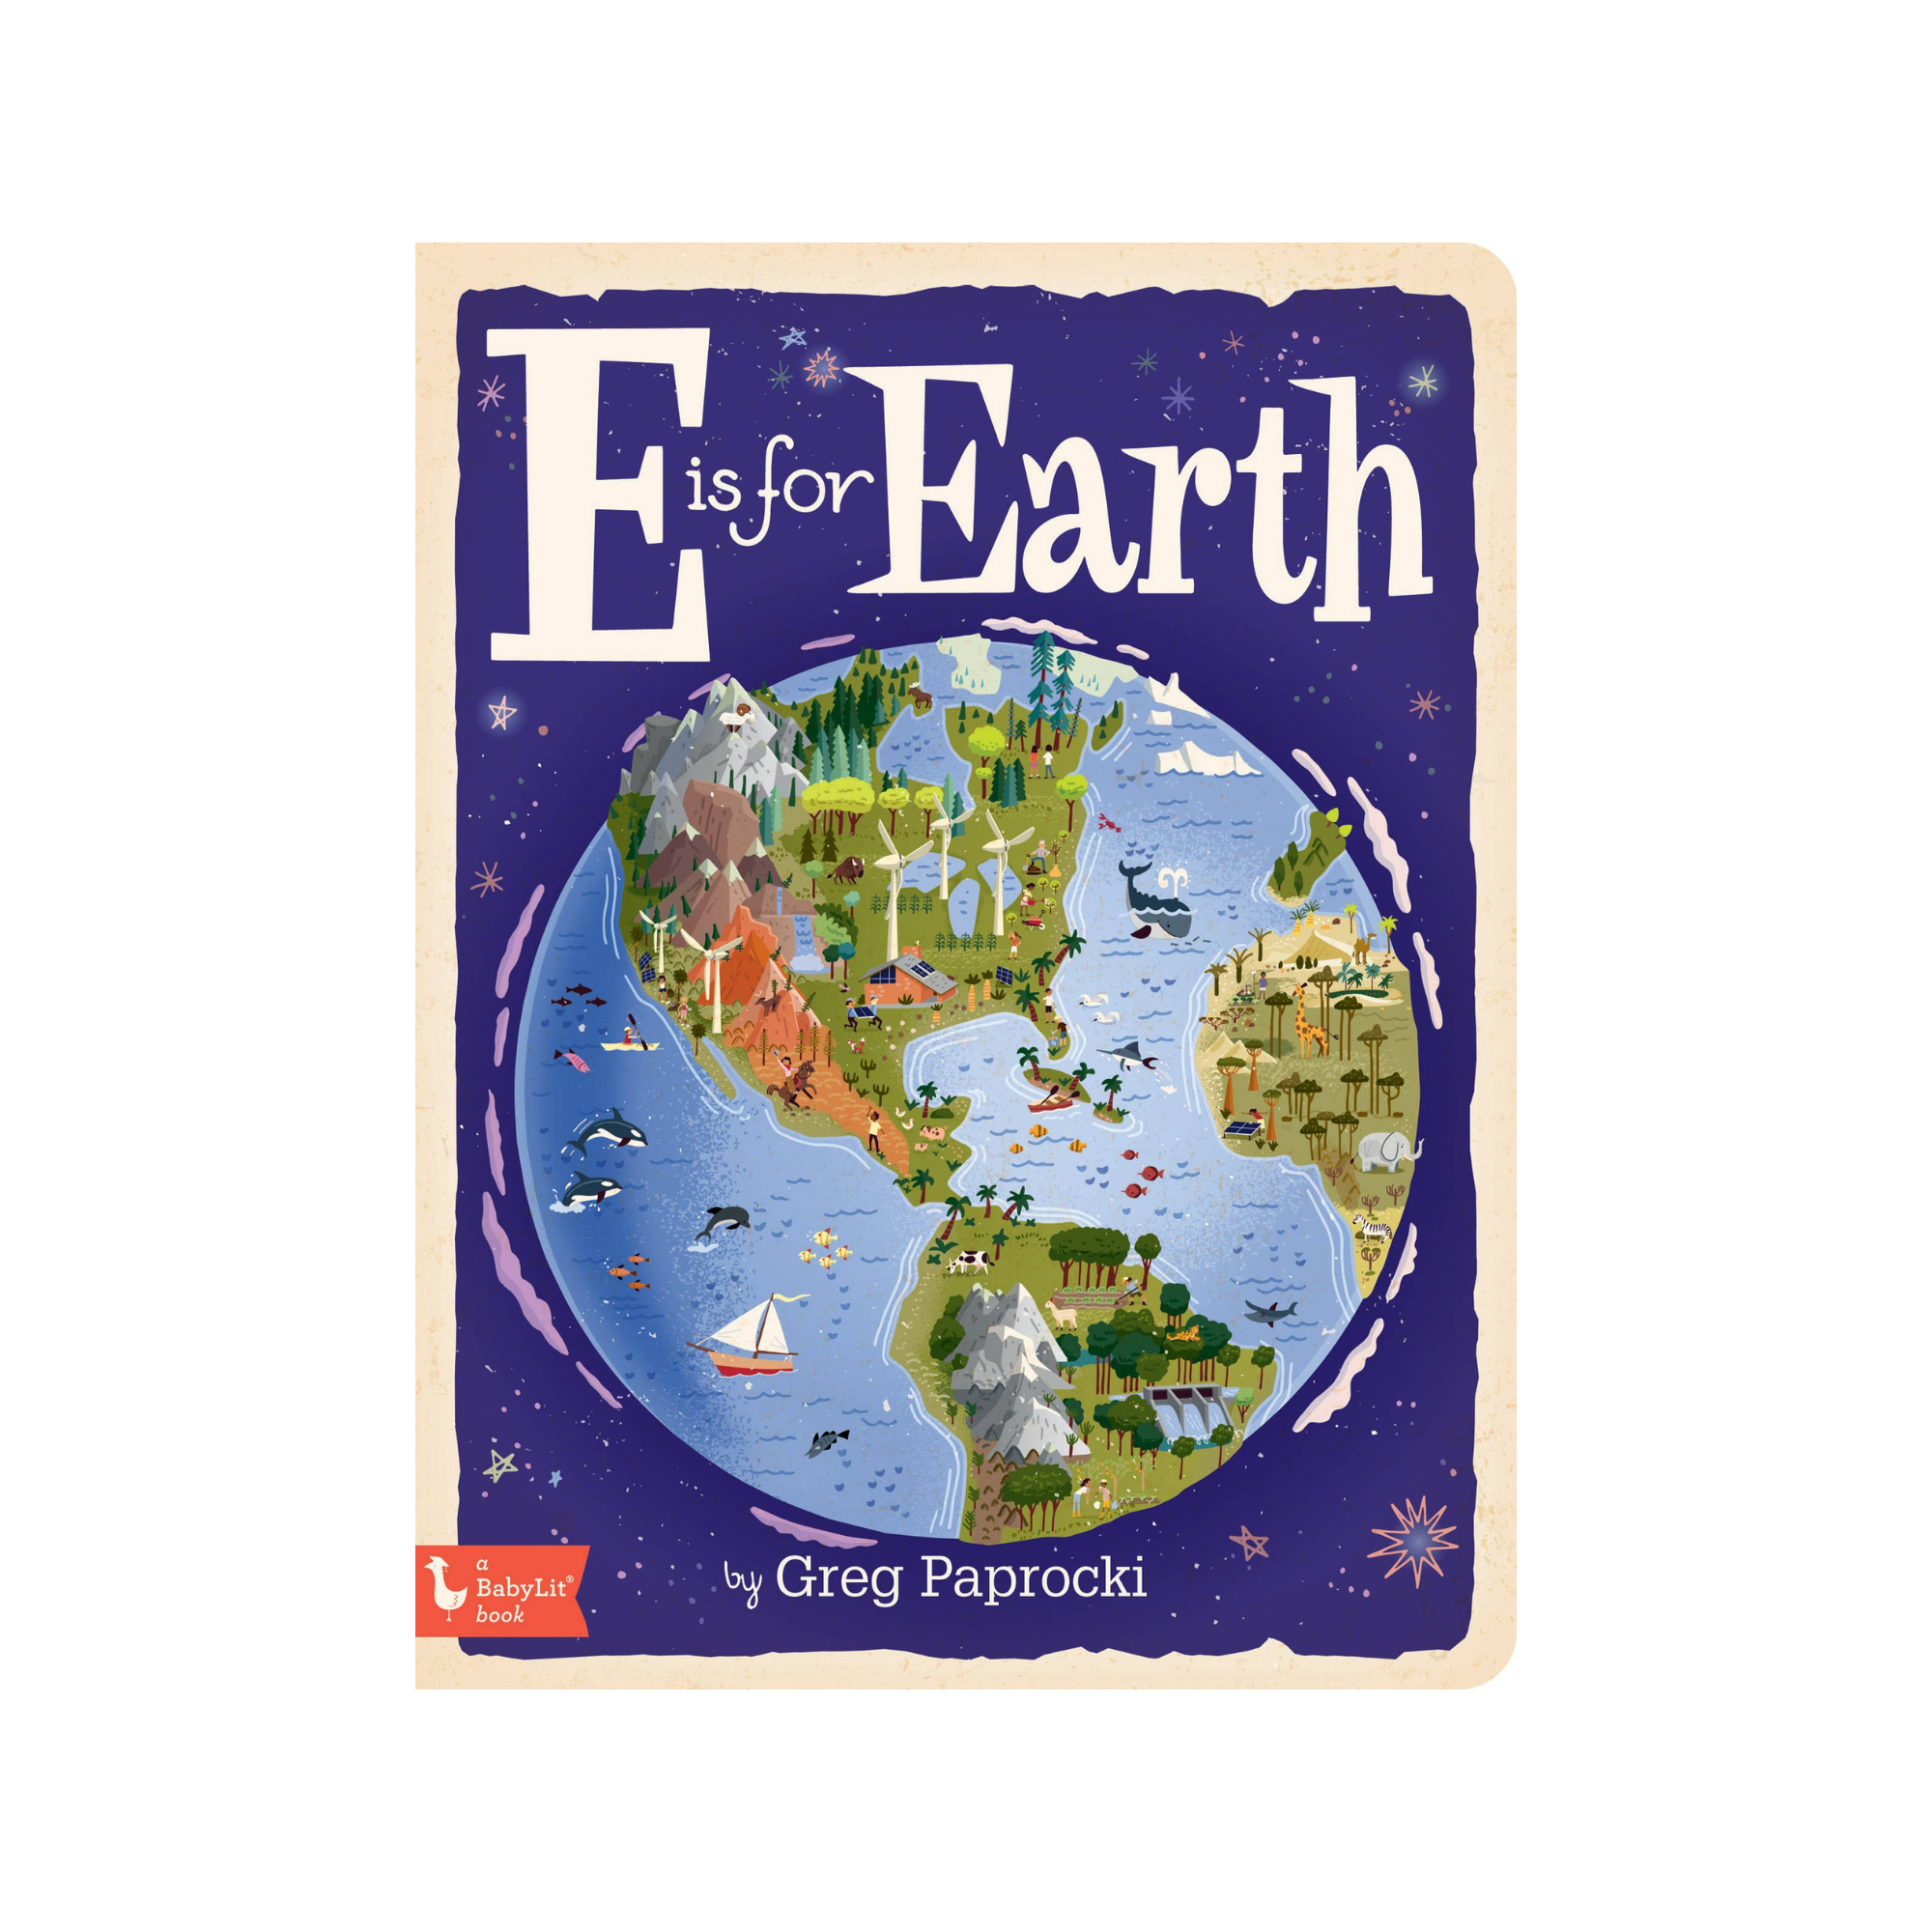 E is for Earth